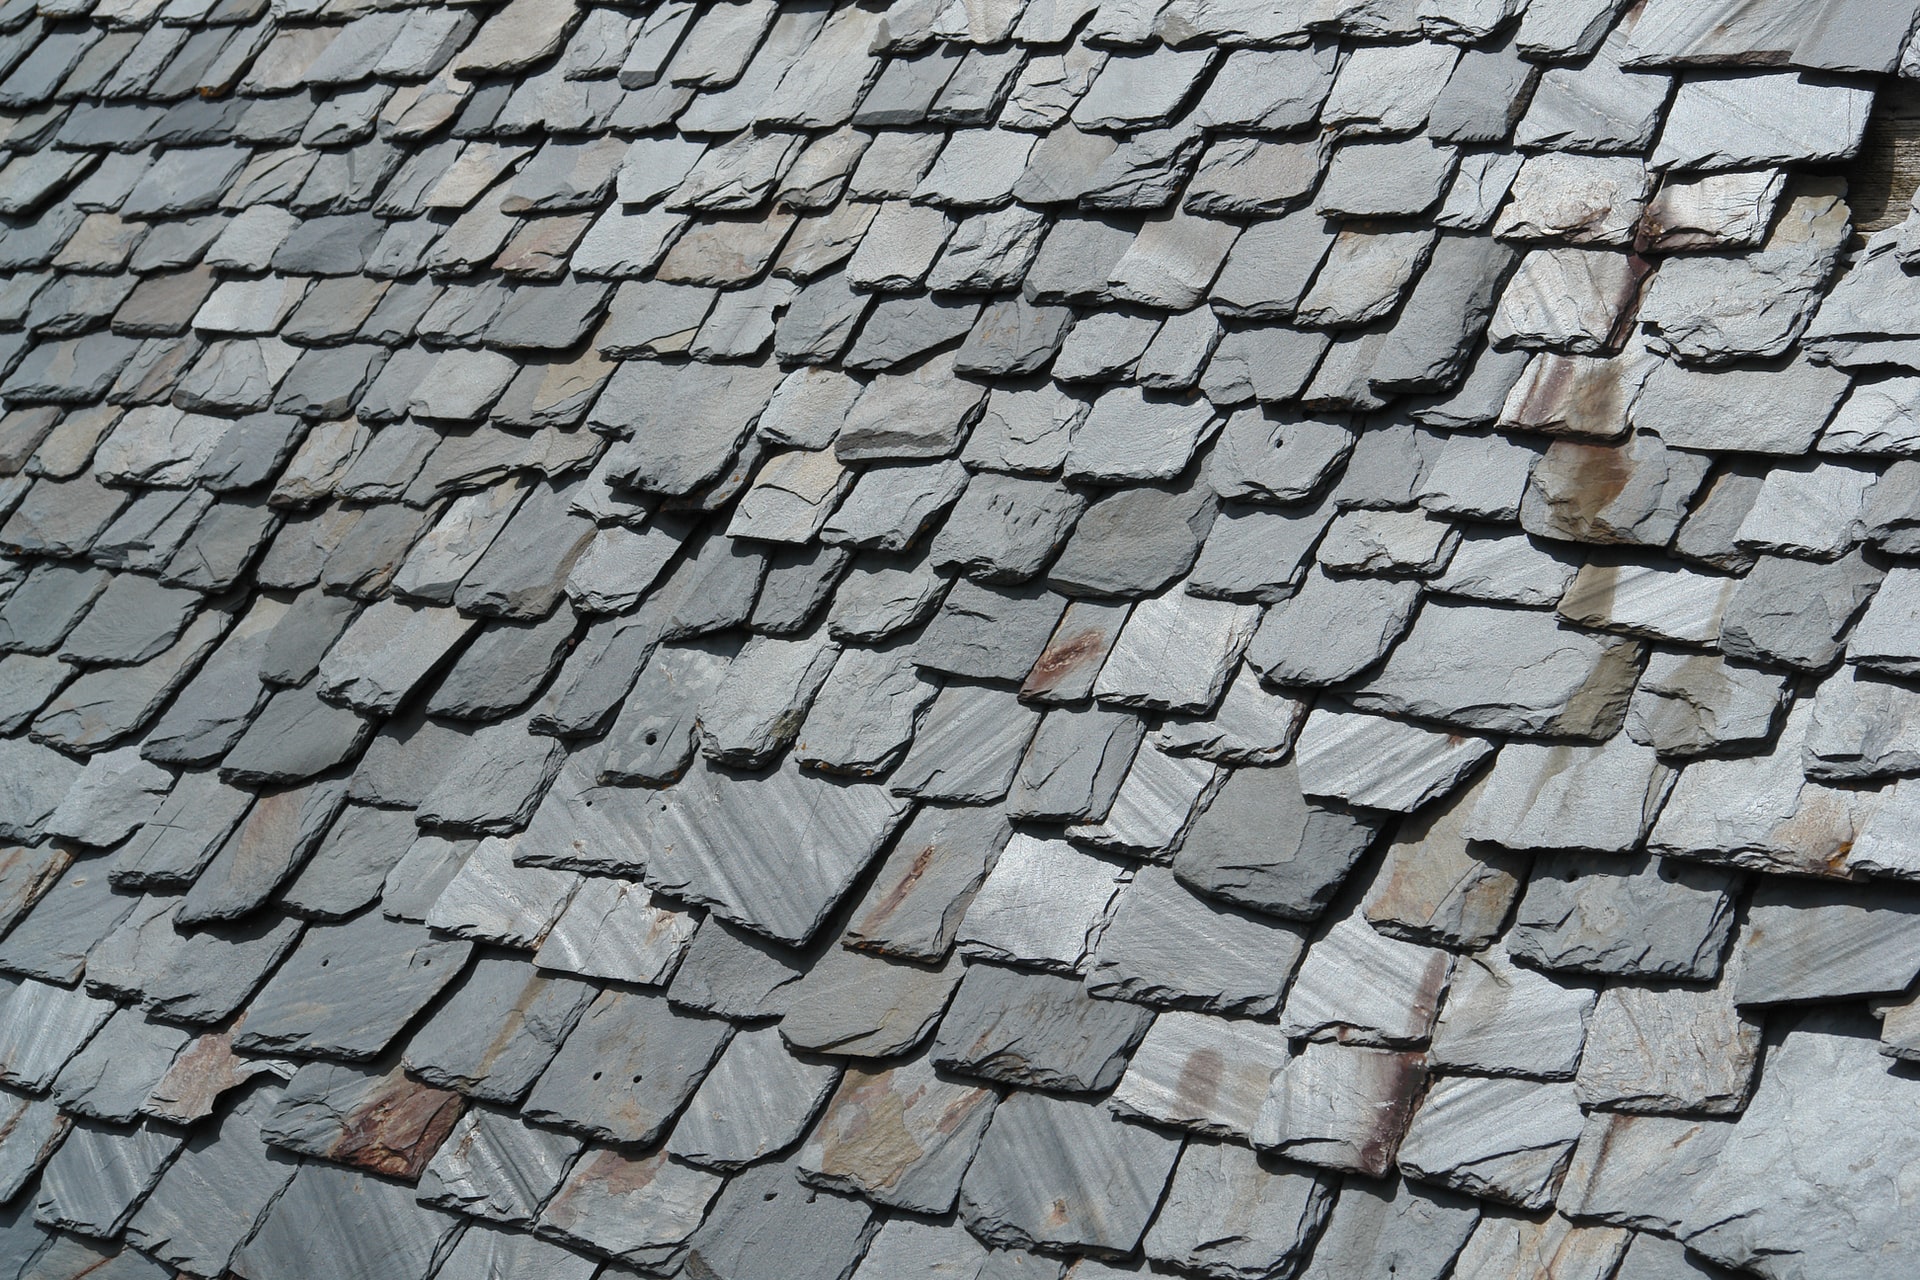 Slate roofing in Saint-sauveur